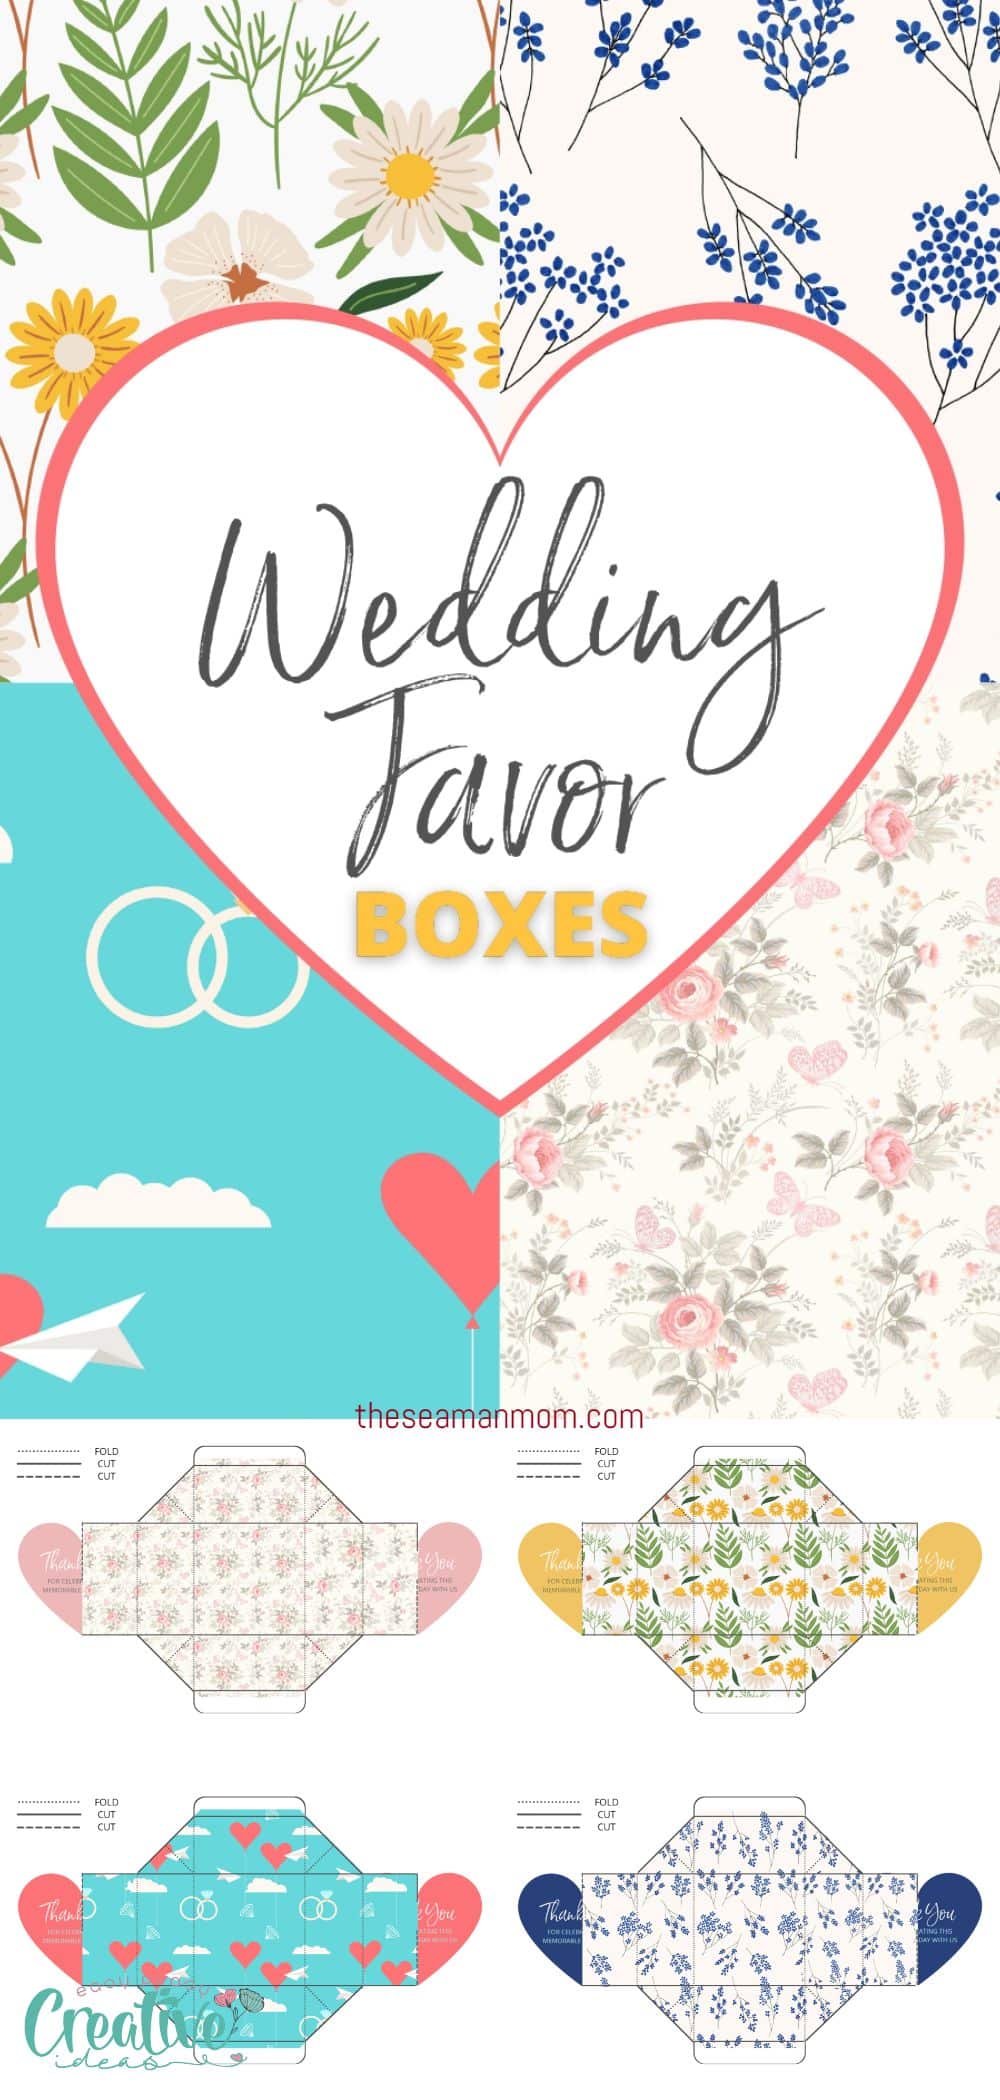 Wedding favor boxes are the perfect way to add a personal touch to your special day. These DIY favor boxes can be customized with your own designs or favorite photos, and they make great wedding guest gift boxes as well. With these wedding favor boxes, you can create unique, personalized gifts that will show your guests how much you appreciate them. You'll be sure to find the perfect favor boxes for your big day! via @petroneagu